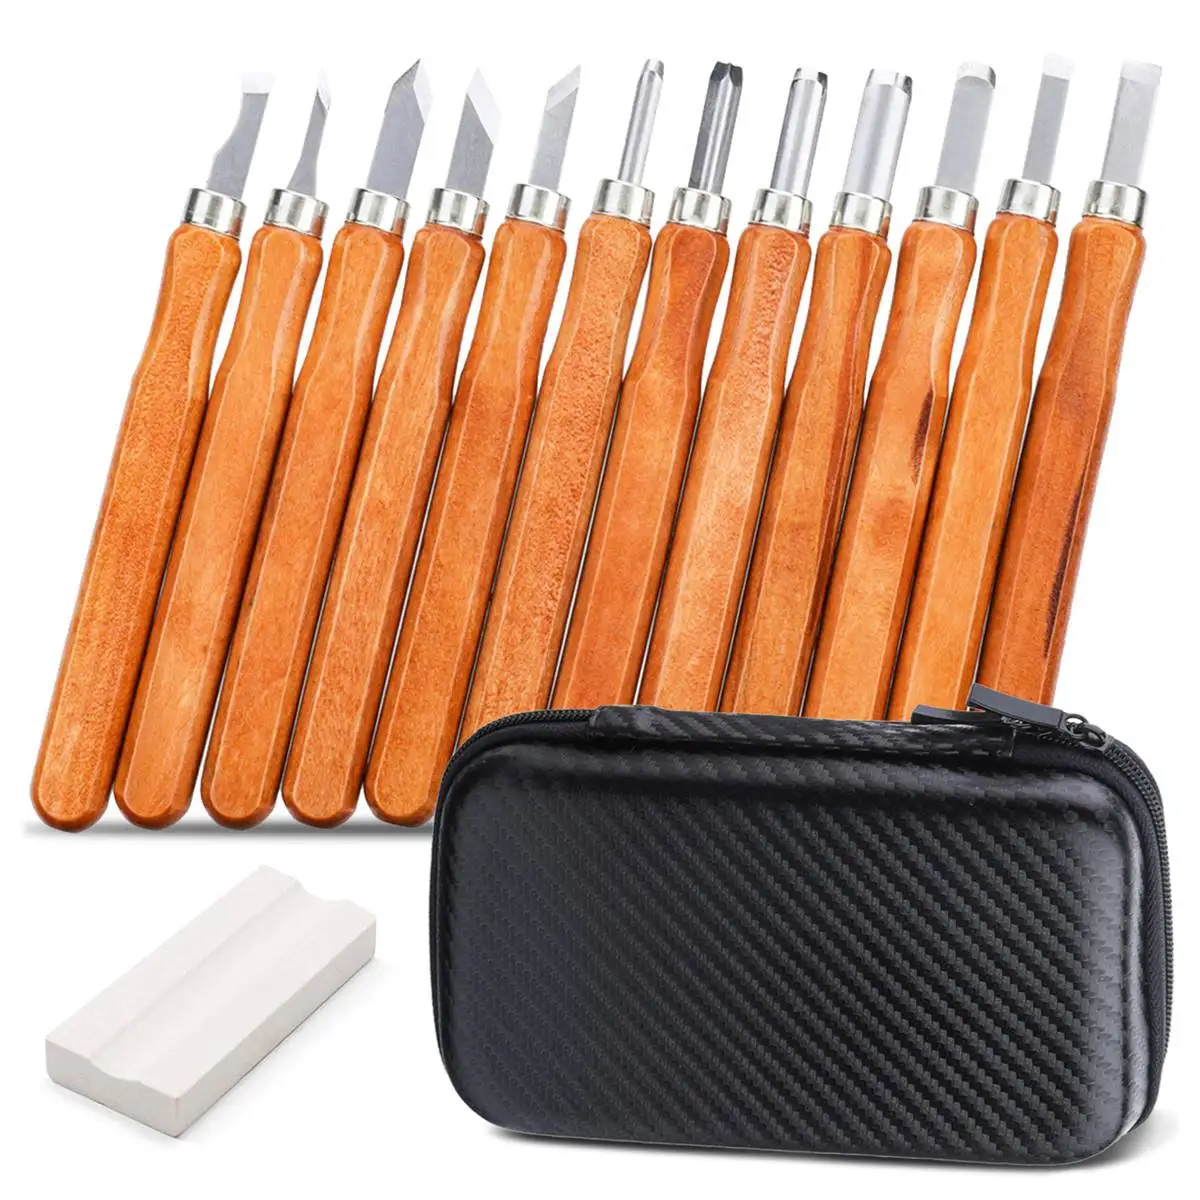 

For Basic Detailed Carving Woodworkers Gouges 12pcs Professional Wood Carving Chisel Knife DIY Pen Woodcut Hand Tool Set